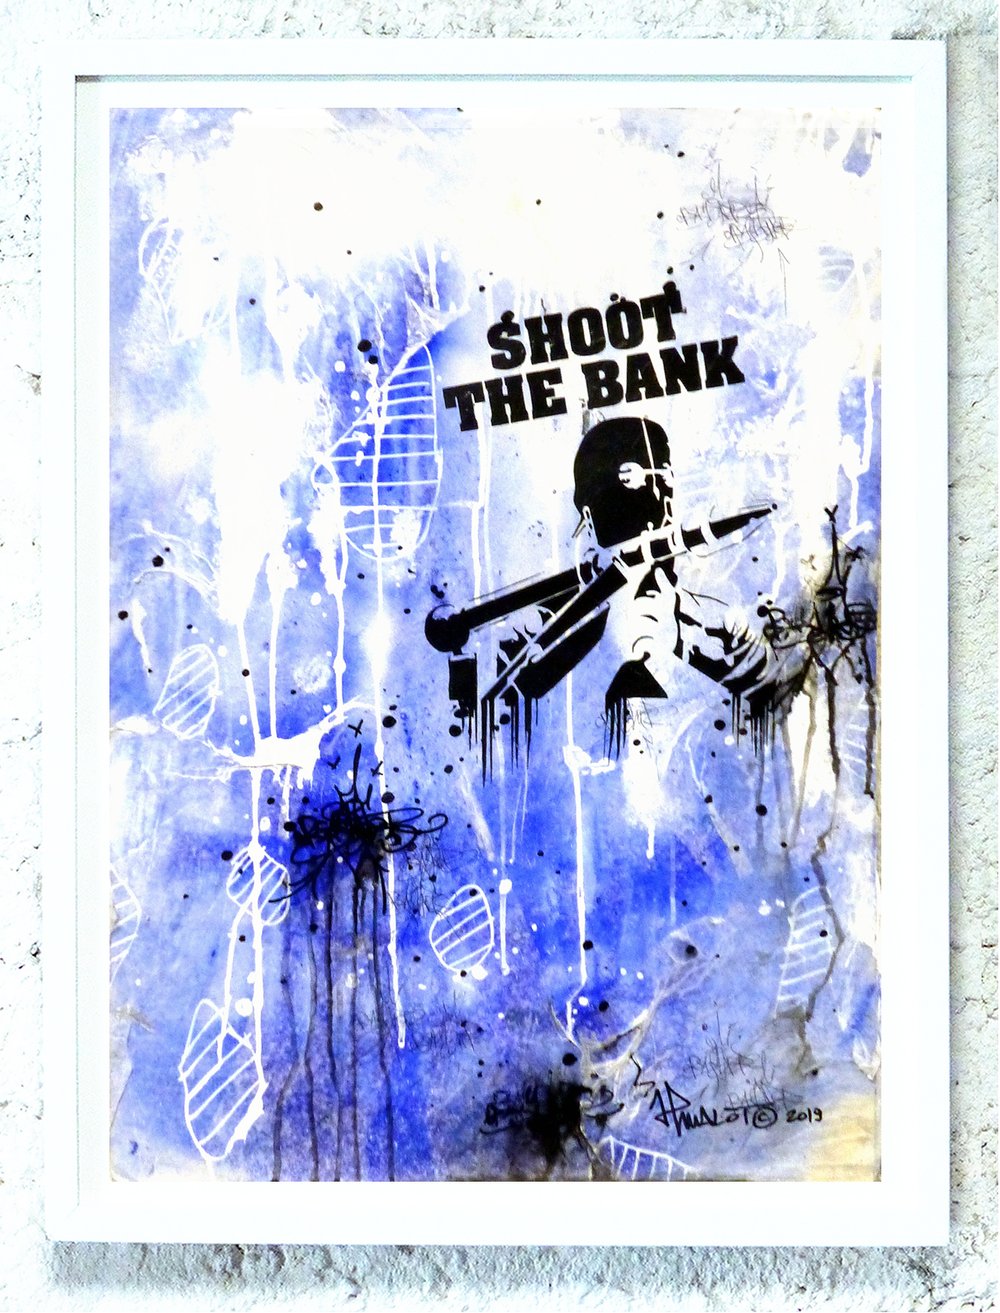 SHOOT THE BANK! On Blue. 2020